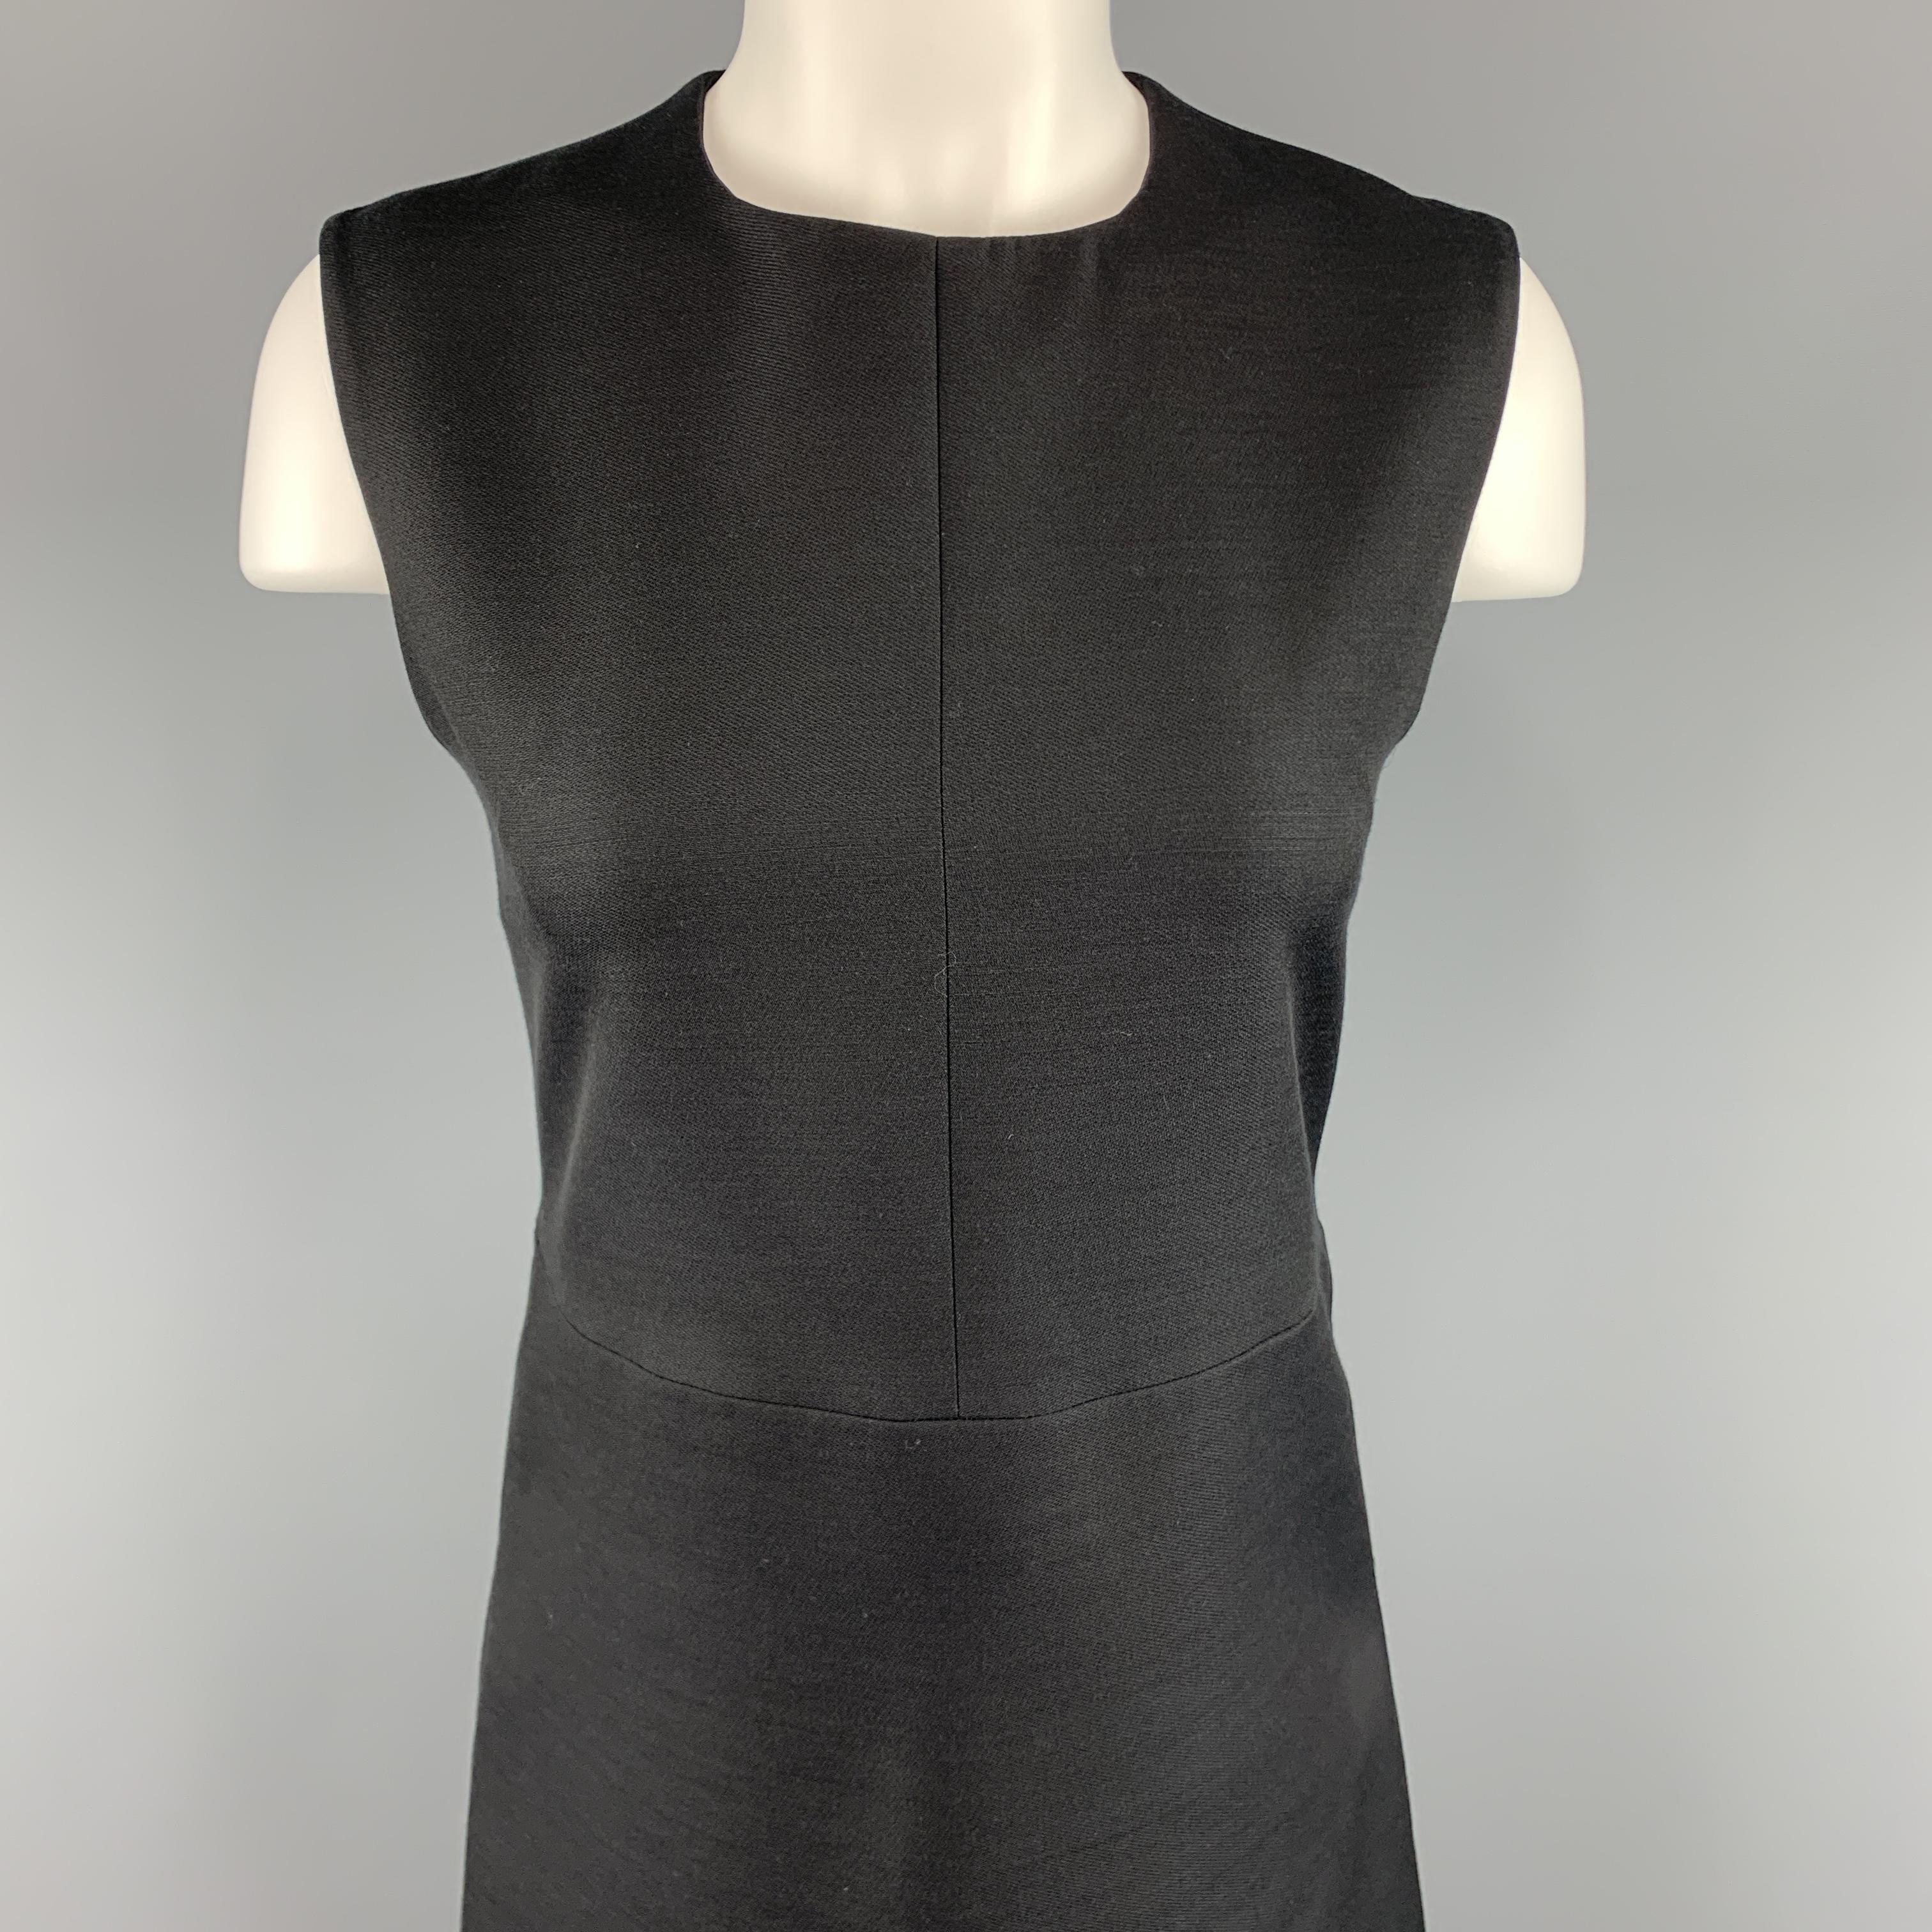 CELINE shift dress comes in a structured woven fabric with a round neckline and A line skirt silhouette. Silk lined. Made in France.

Excellent Pre-Owned Condition.
Marked: FR 38

Measurements:

Shoulder: 14.5 in.
Bust: 33 in.
Waist: 30 in.
Hip: 38